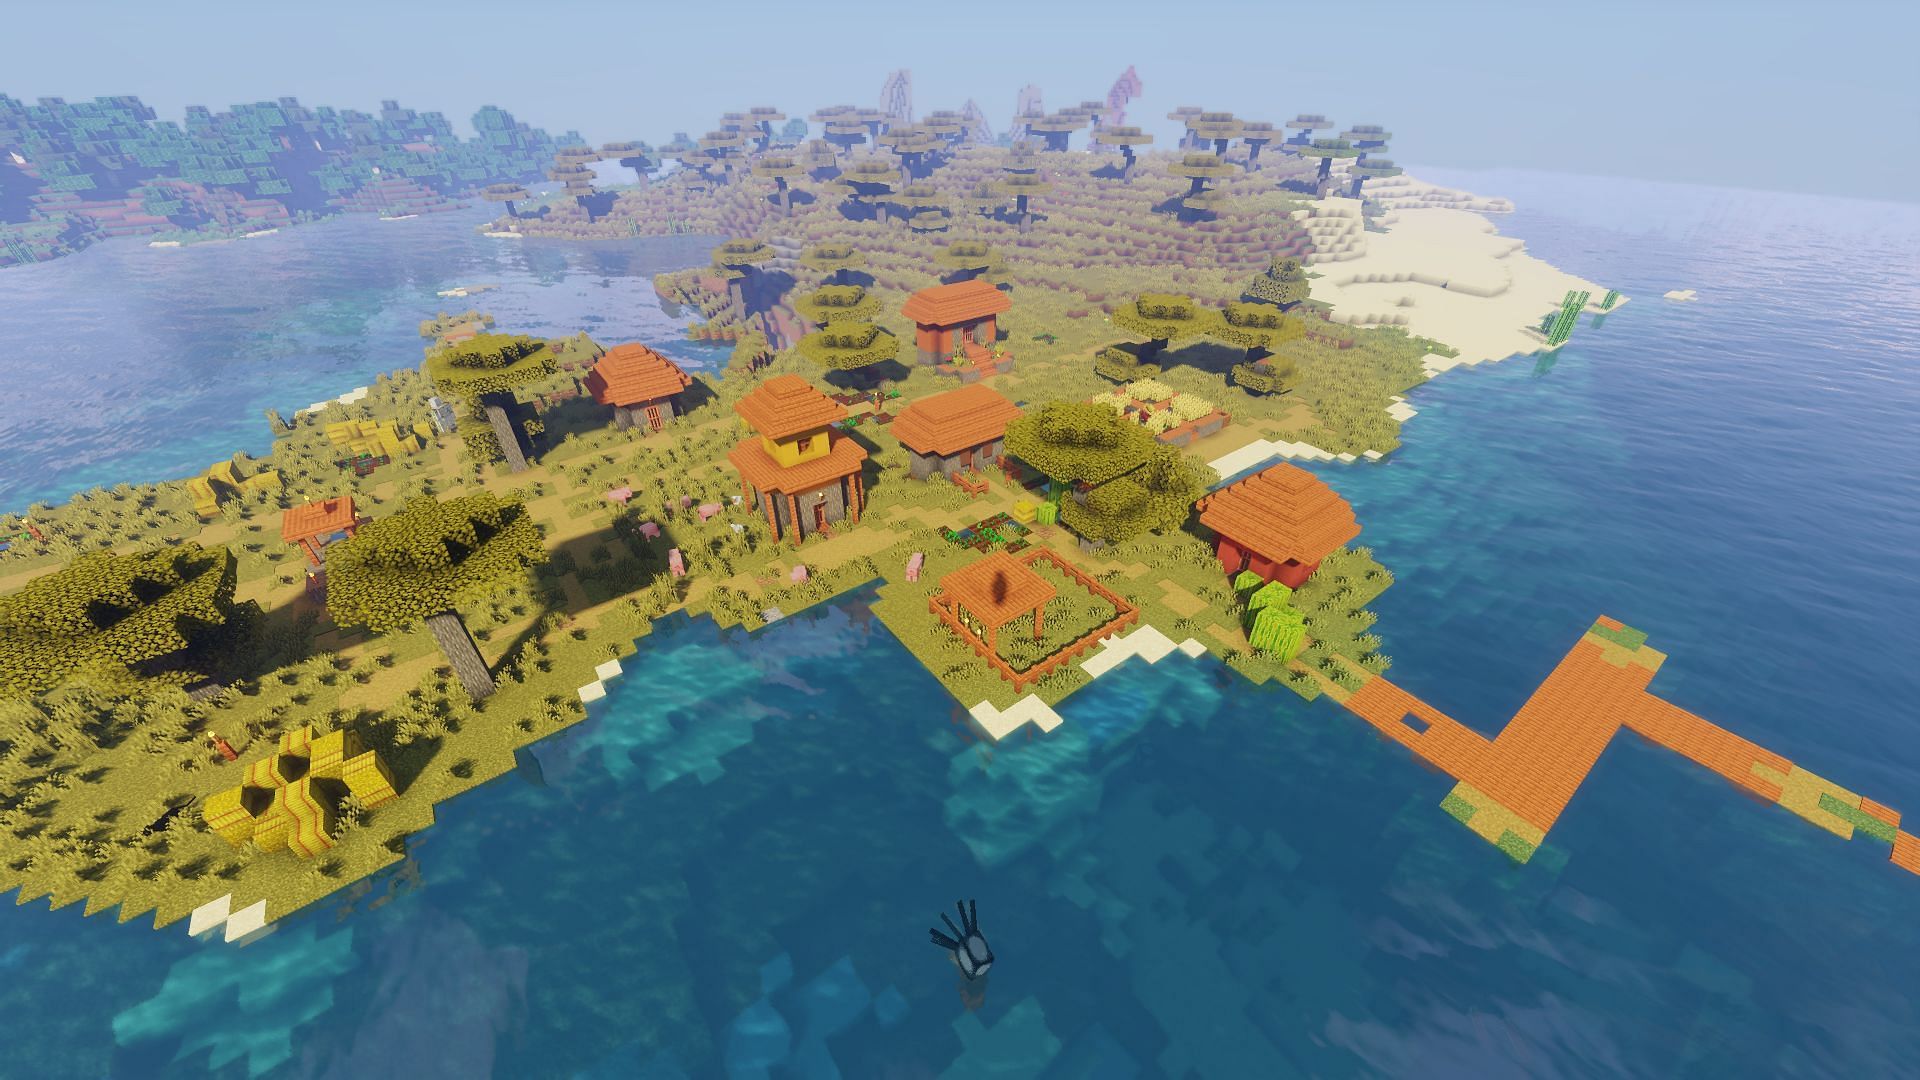 The river village found closest to spawn on seed 2646269679380330260 (Image via Minecraft)